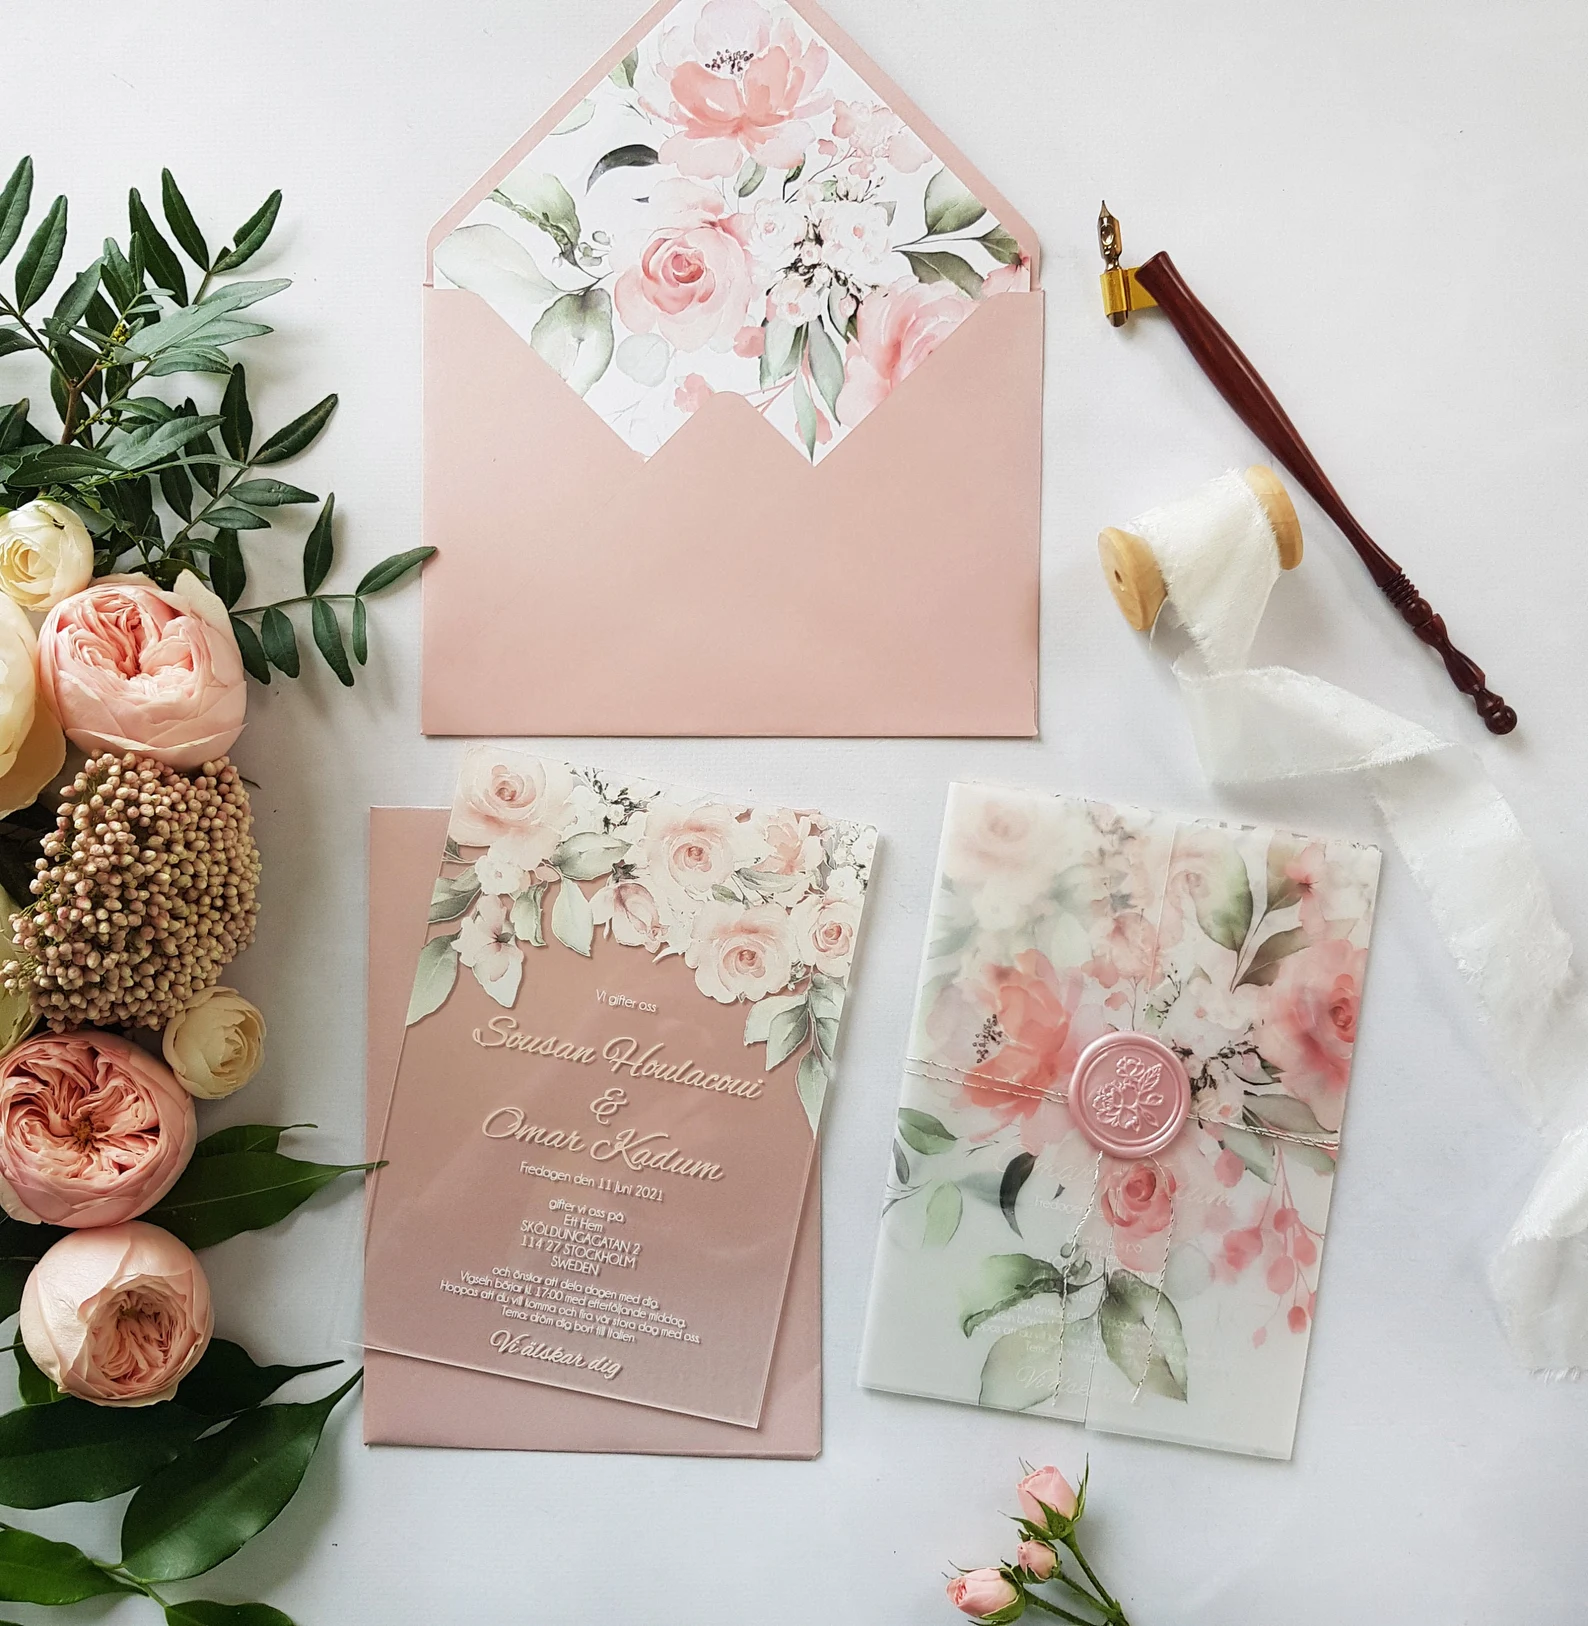 Blush floral acrylic invitation with vellum wrap and wax seal